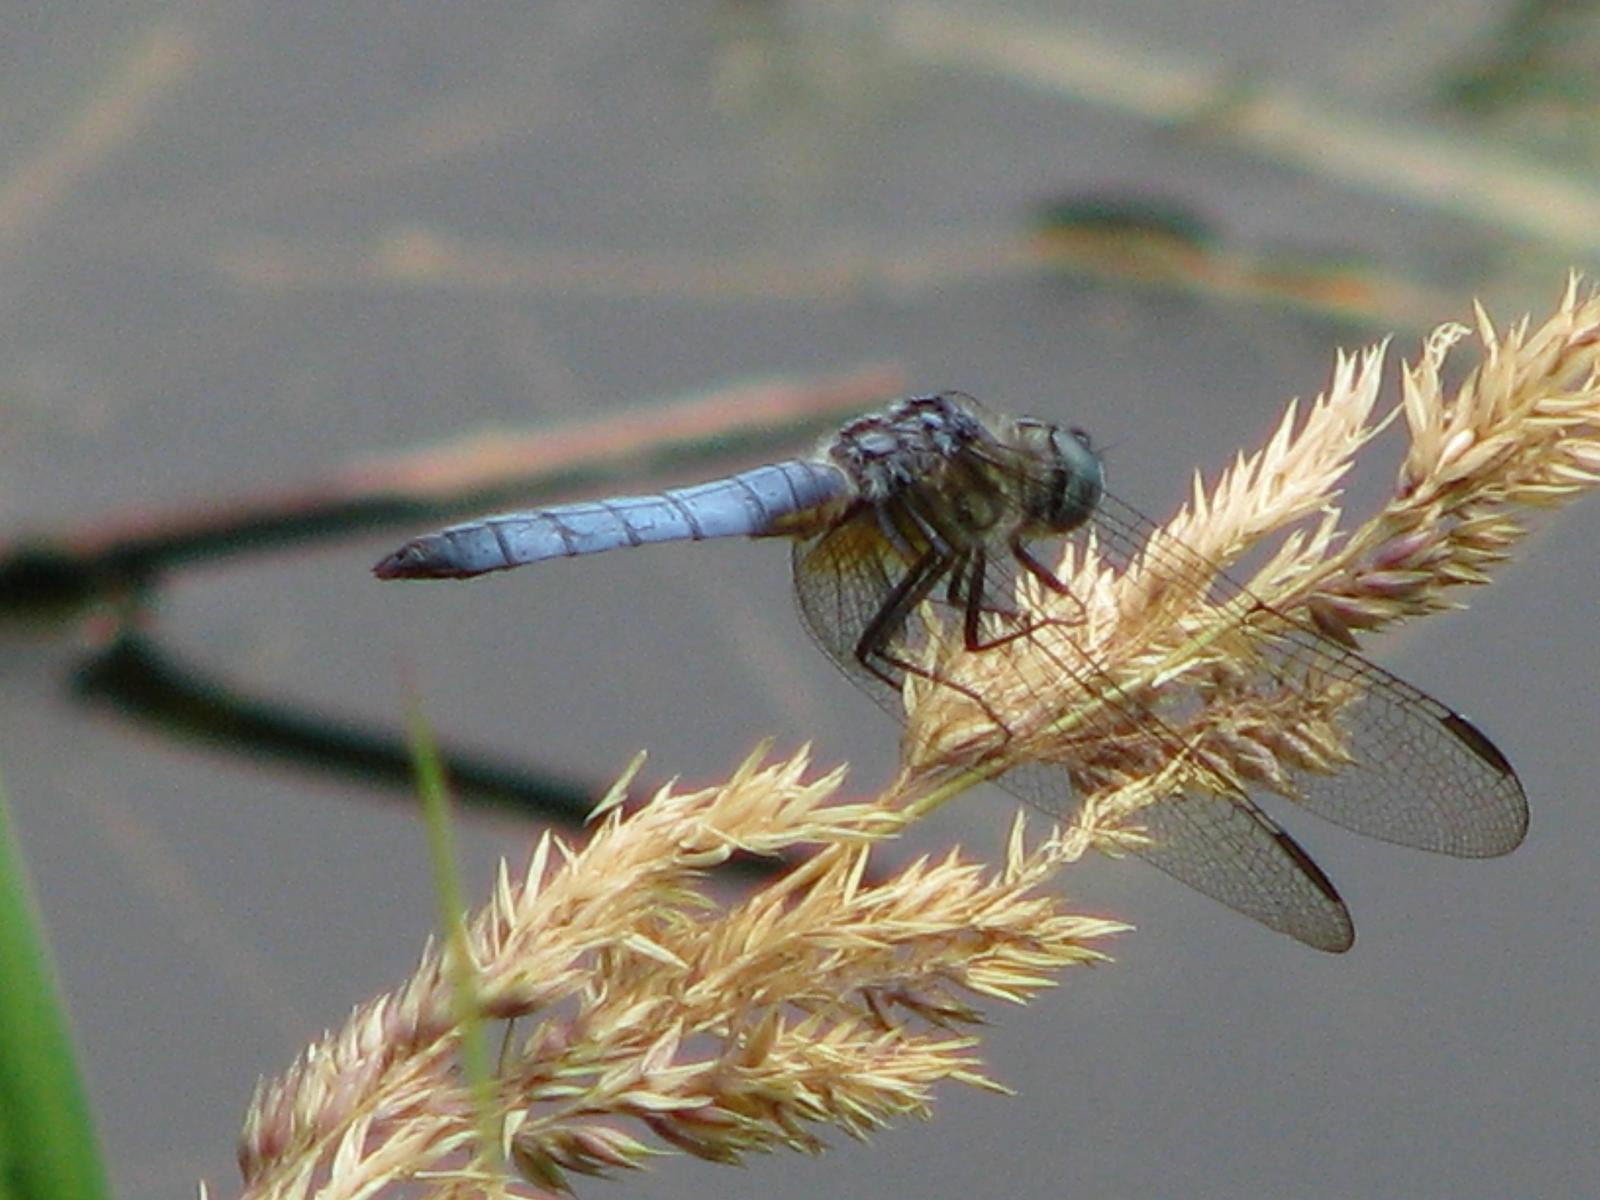 Blue Dasher Photo by Ted Goshulak